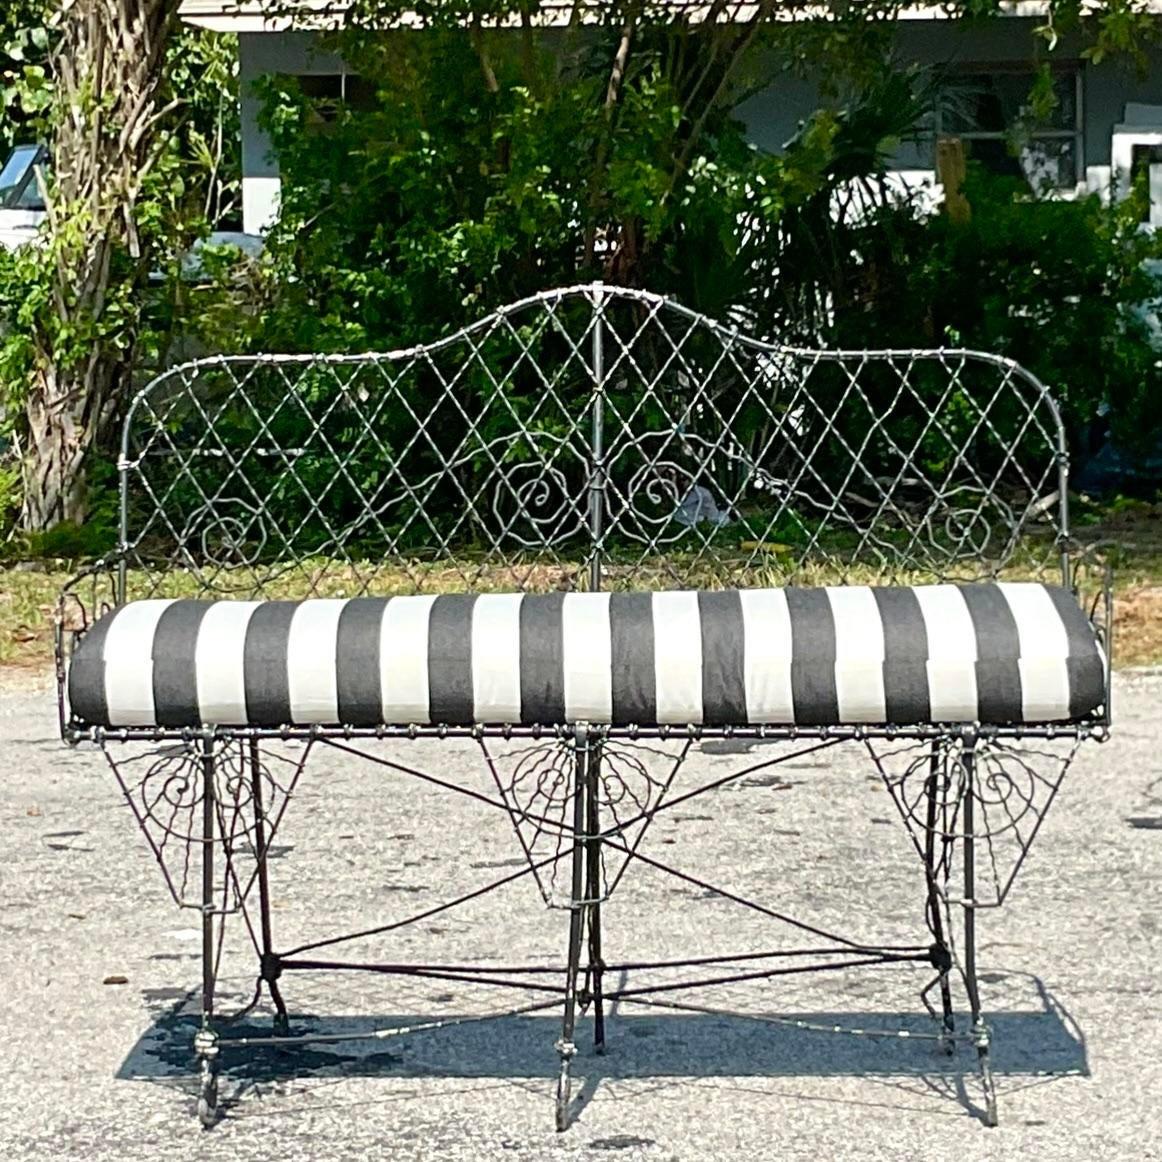 Vintage 19th Century French Art Nouveau Wire Garden Bench In Good Condition For Sale In west palm beach, FL